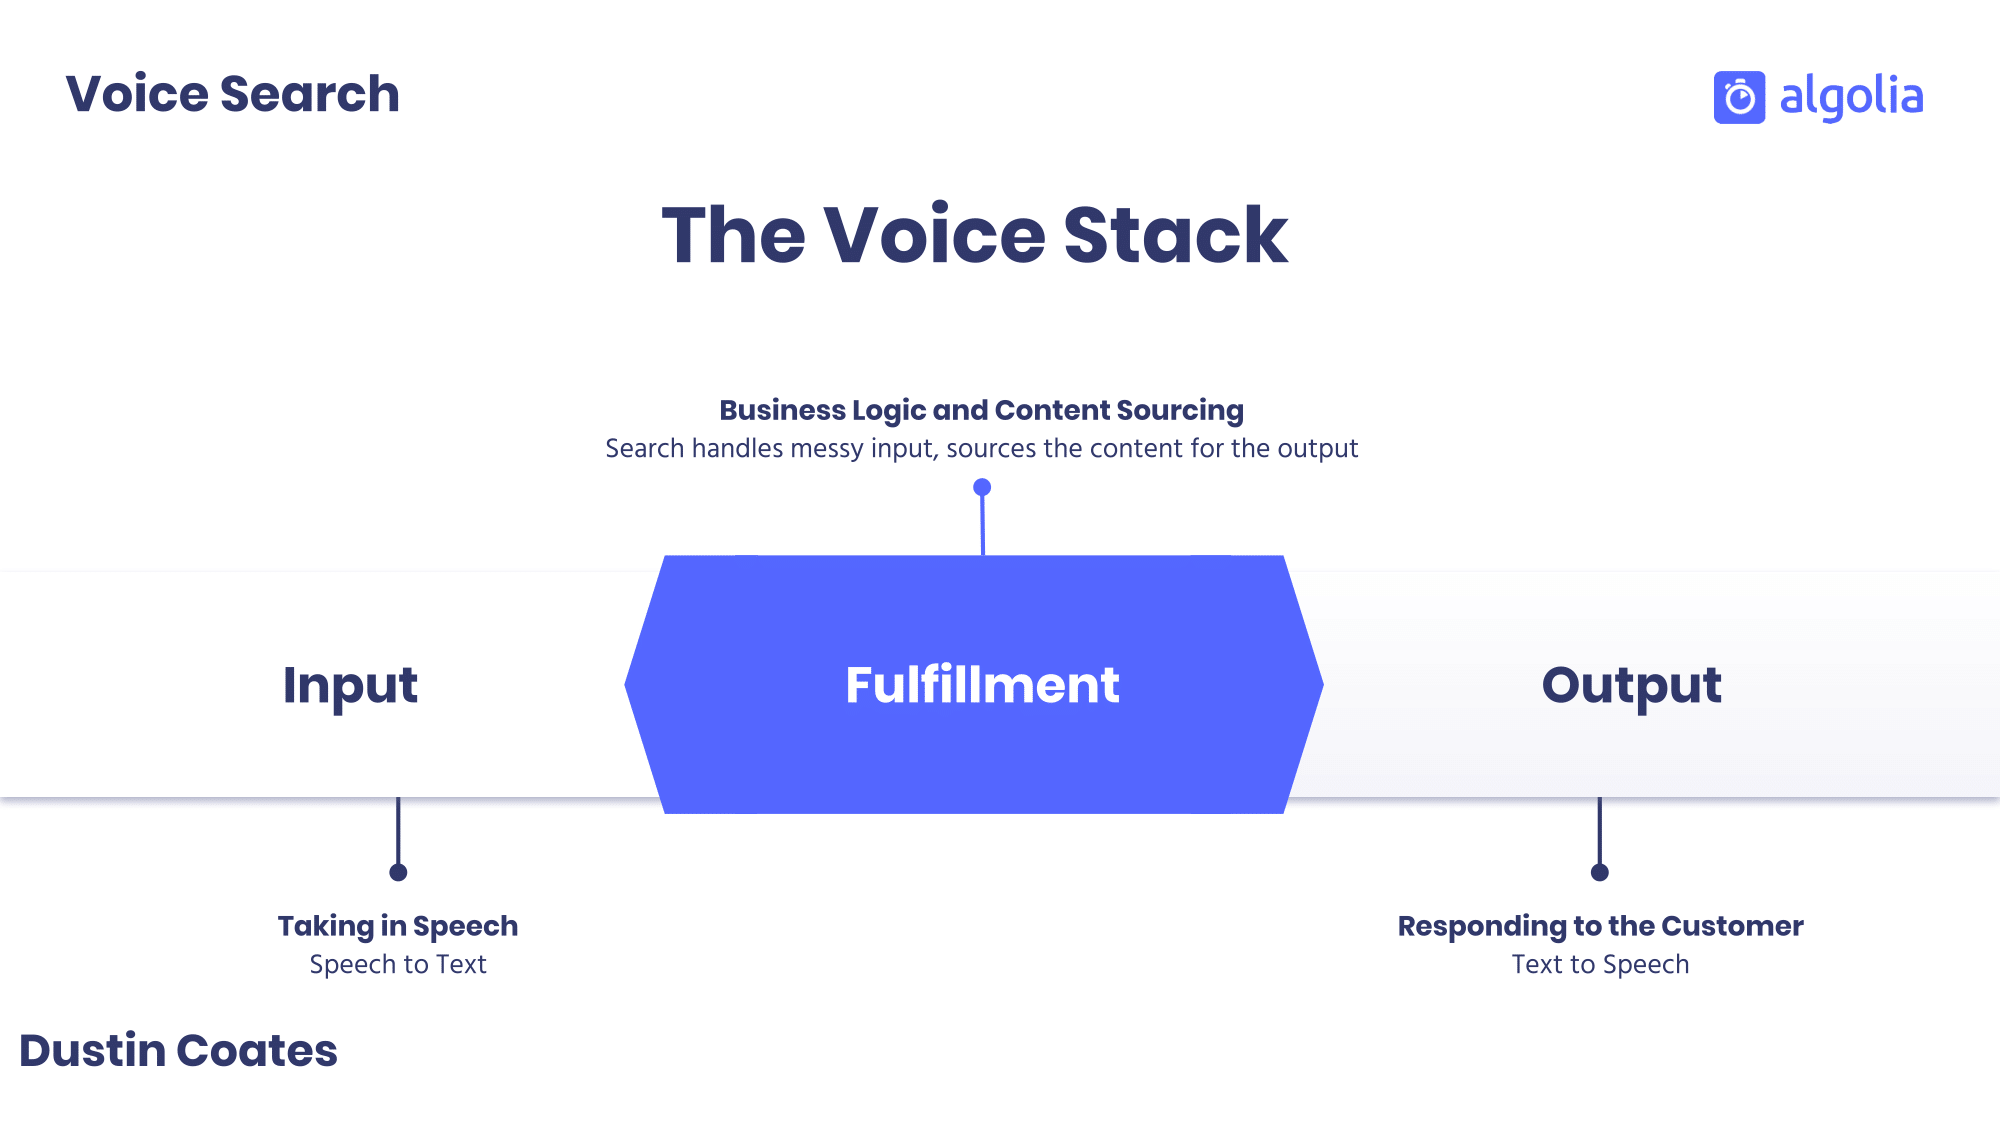 The voice stack: input, output, and fulfillment